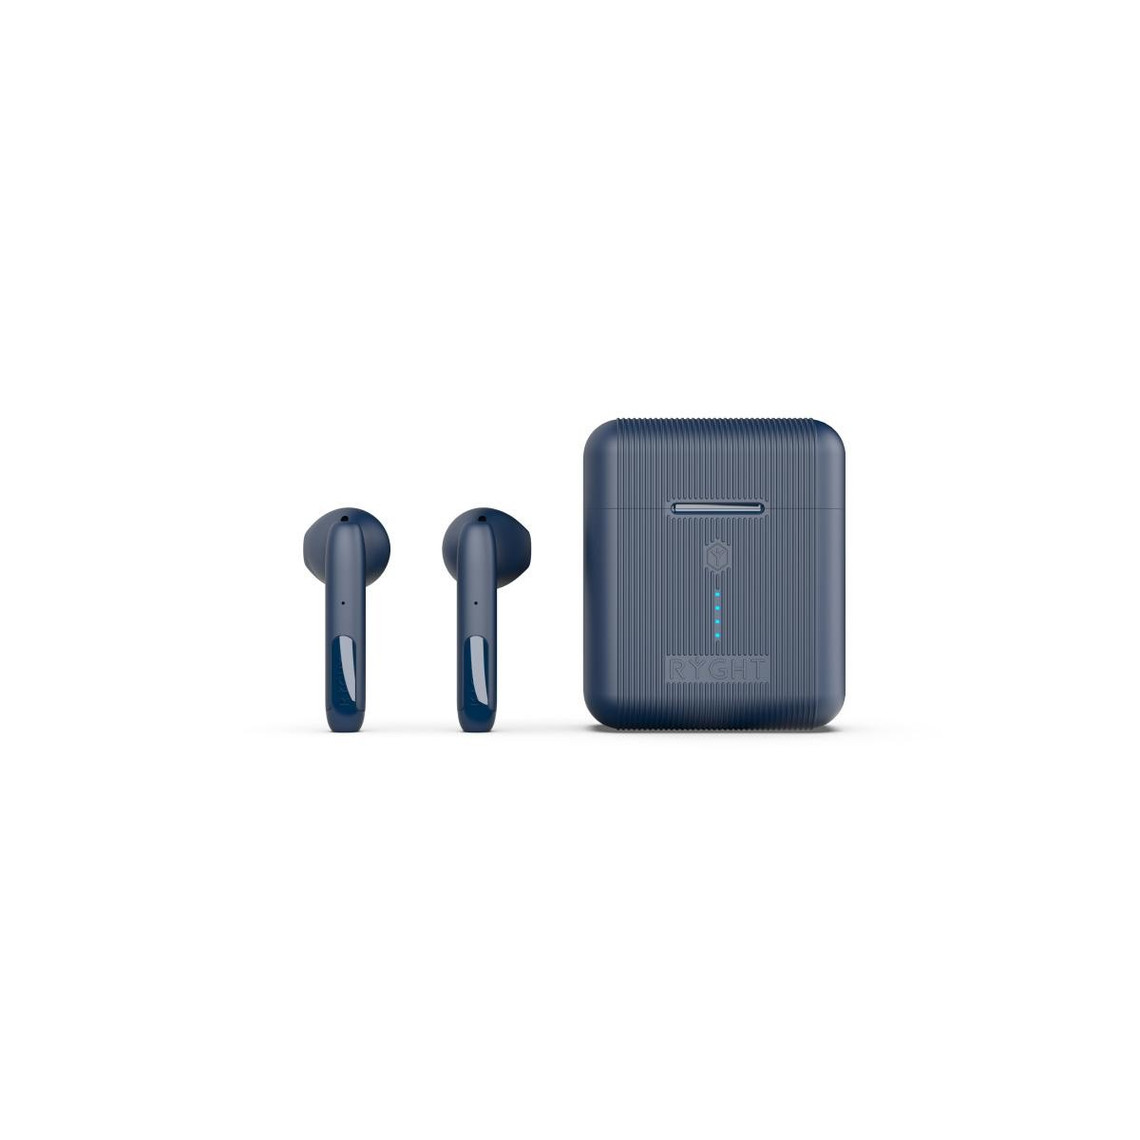 Ecouteurs intra-auriculaires Ryght RYGHT VEHO - Ecouteurs Sans fil Bluetooth avec boitier Semi-Intra True Wireless Earbuds pour "OPPO Find X3 Lite" (BLEU)